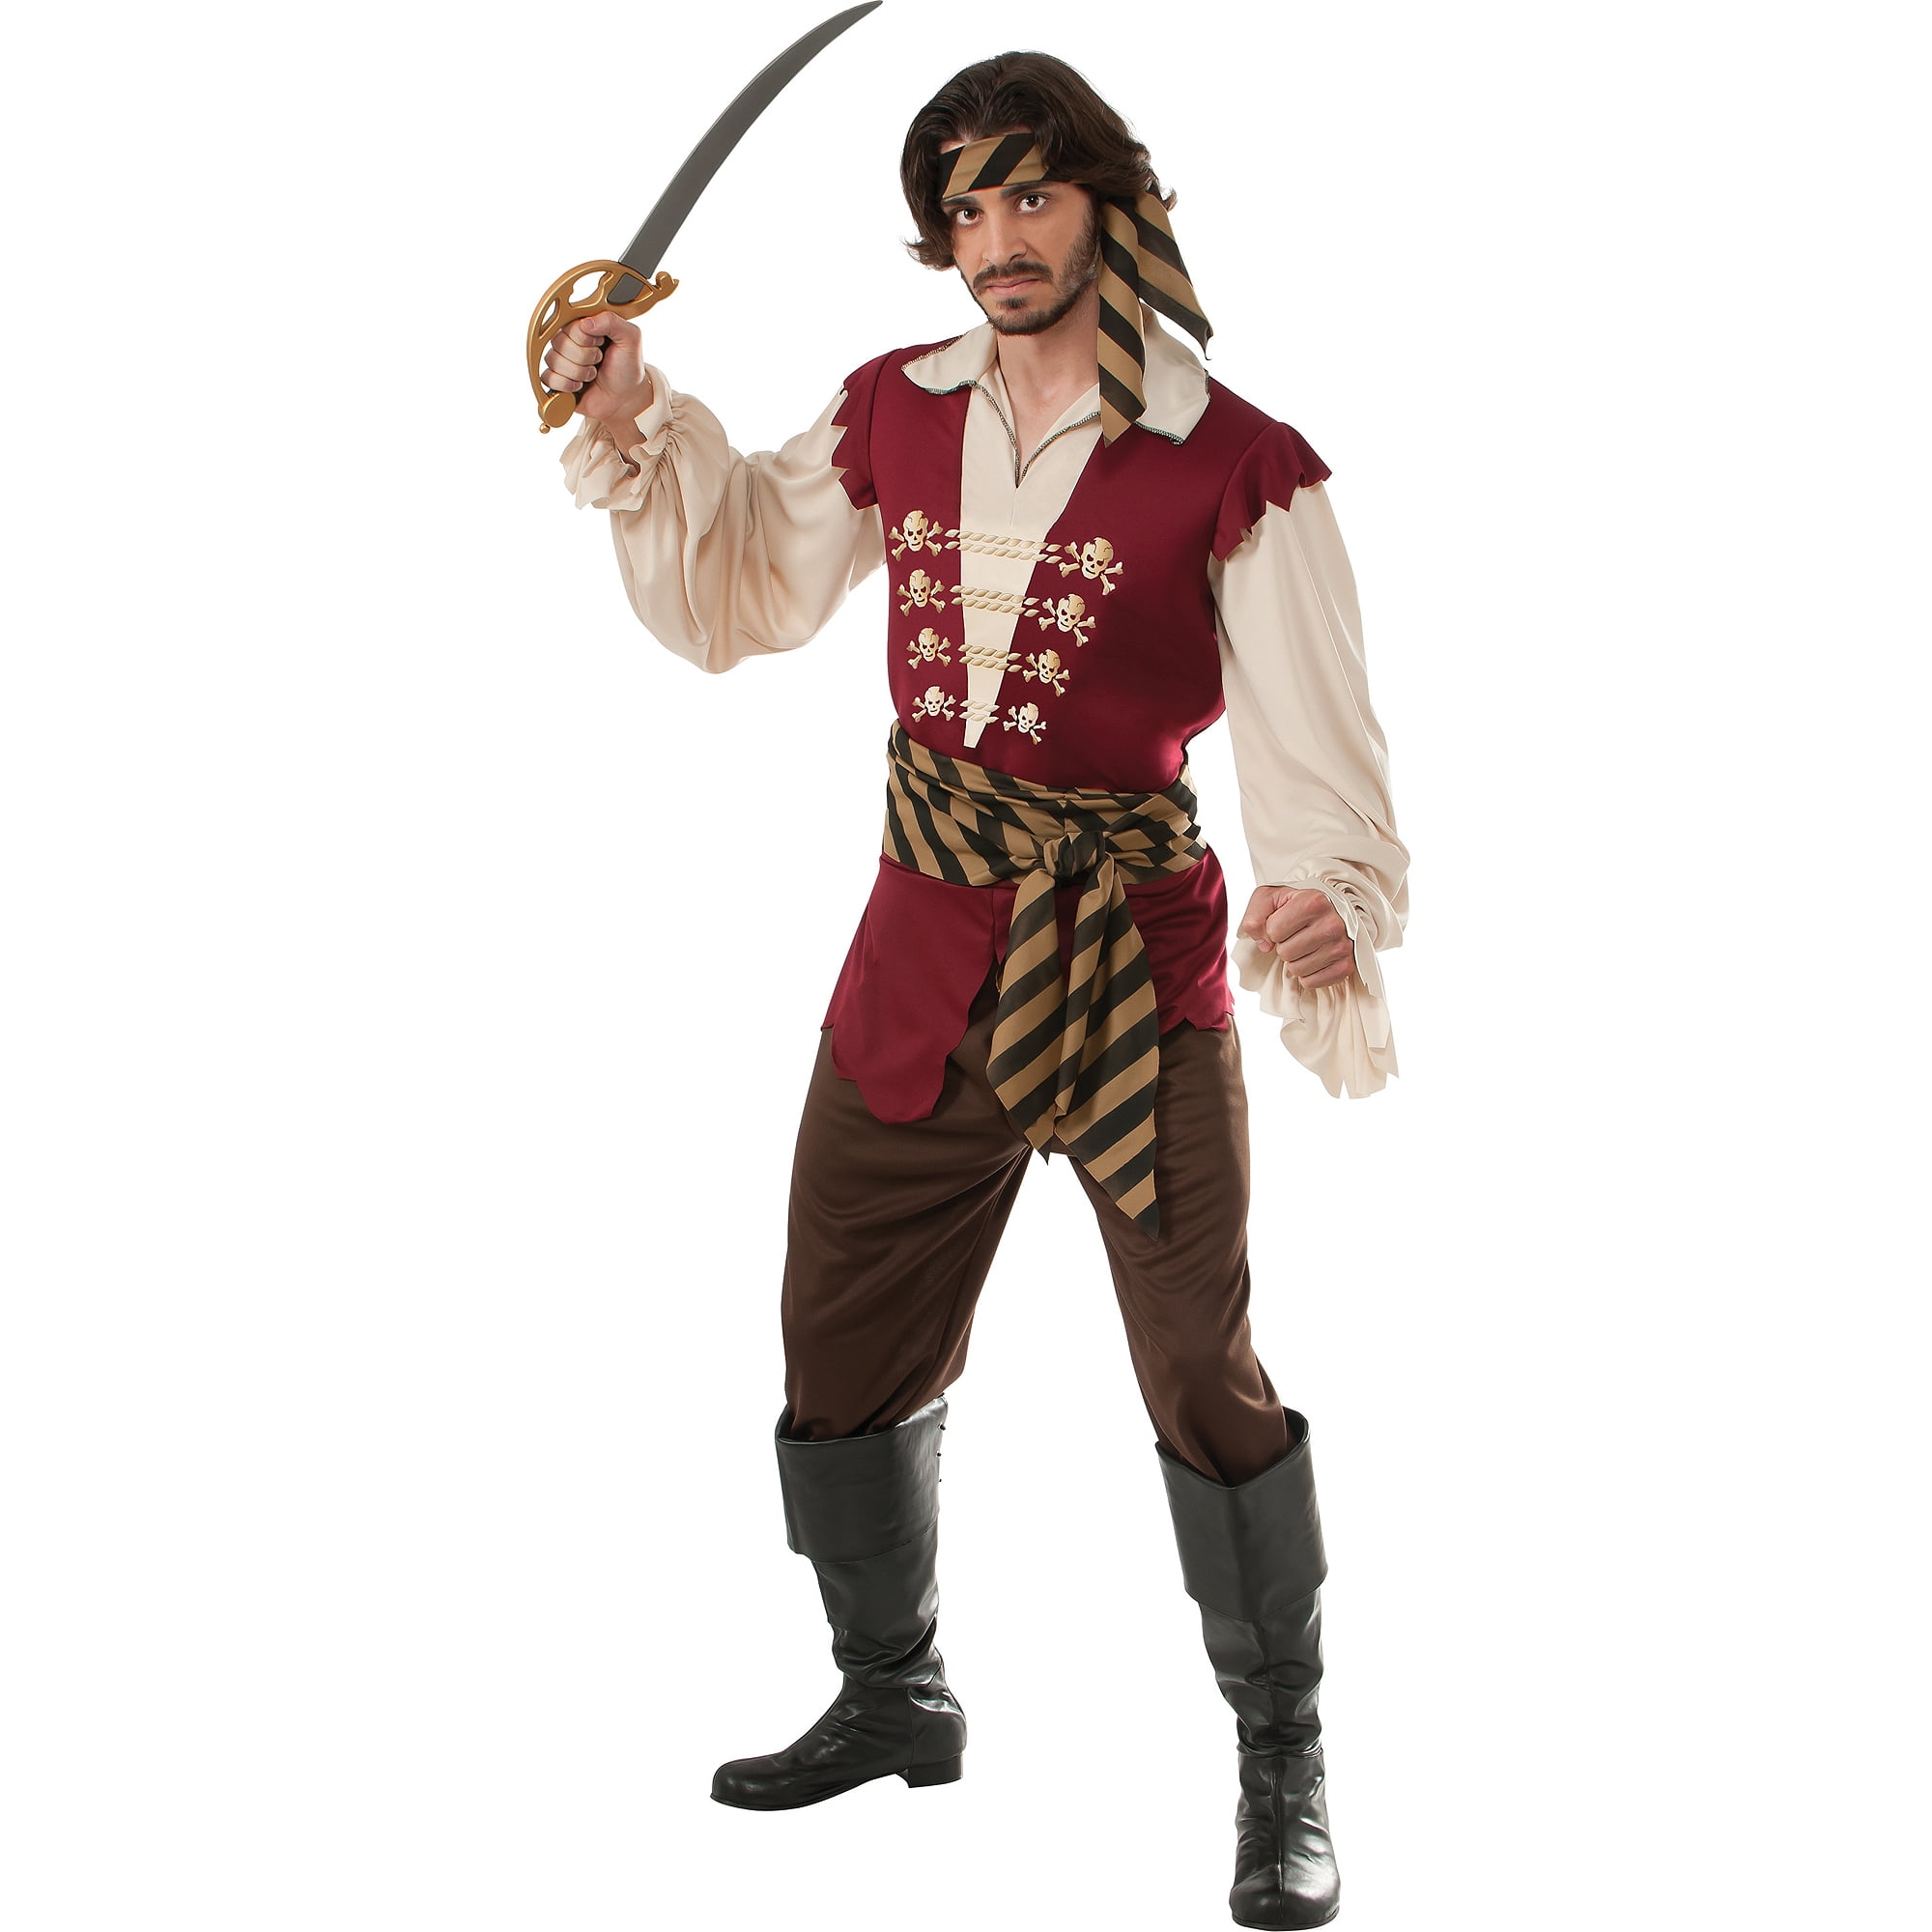 Way To Celebrate - Celebrate Together Collection, Men's Pirate Halloween Costume Large - Walmart.com